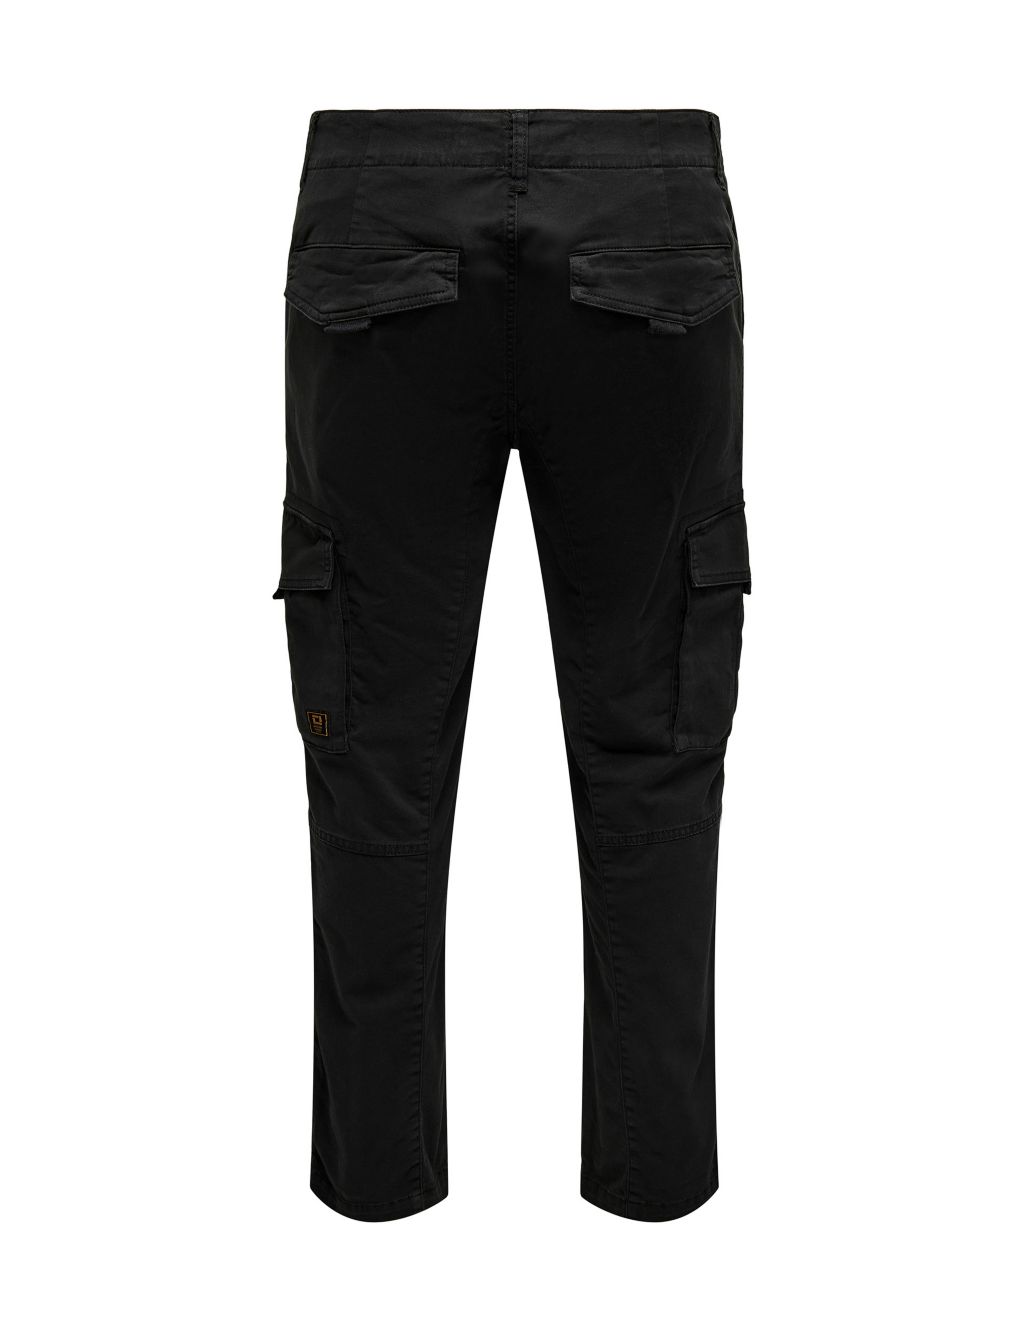 Tapered Fit Cargo Trousers image 8